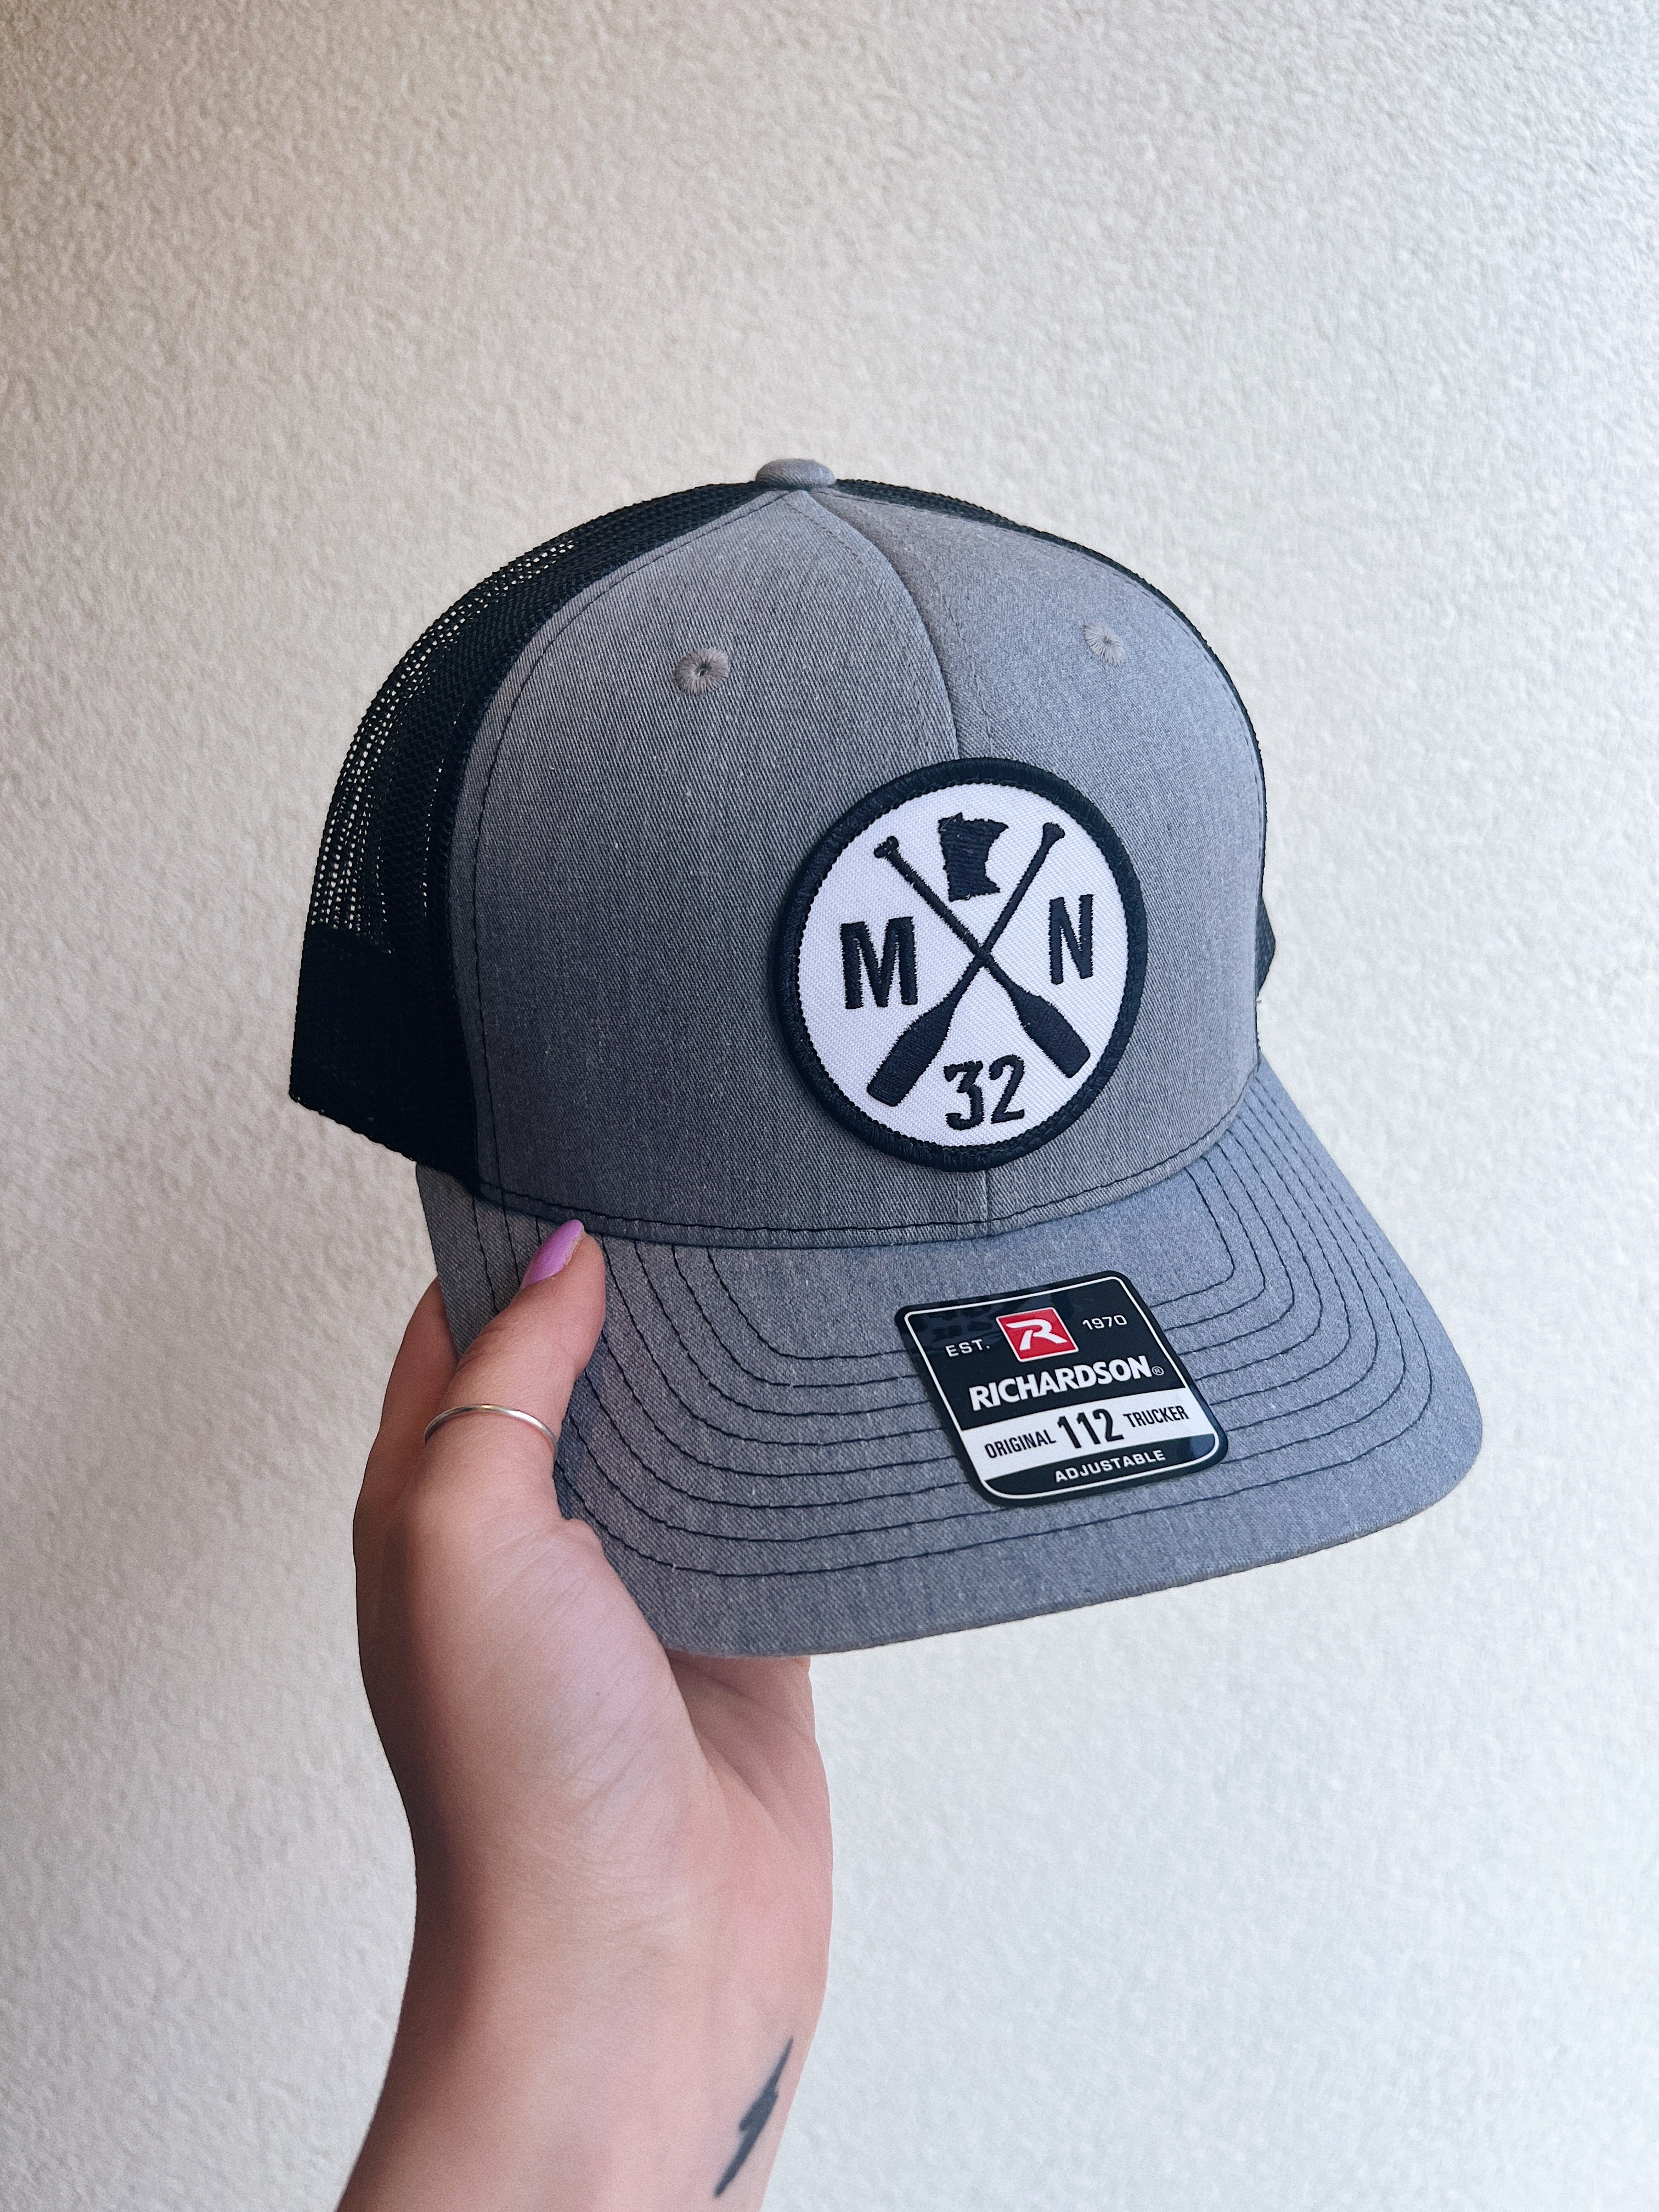 the classic mn paddle mesh snapback